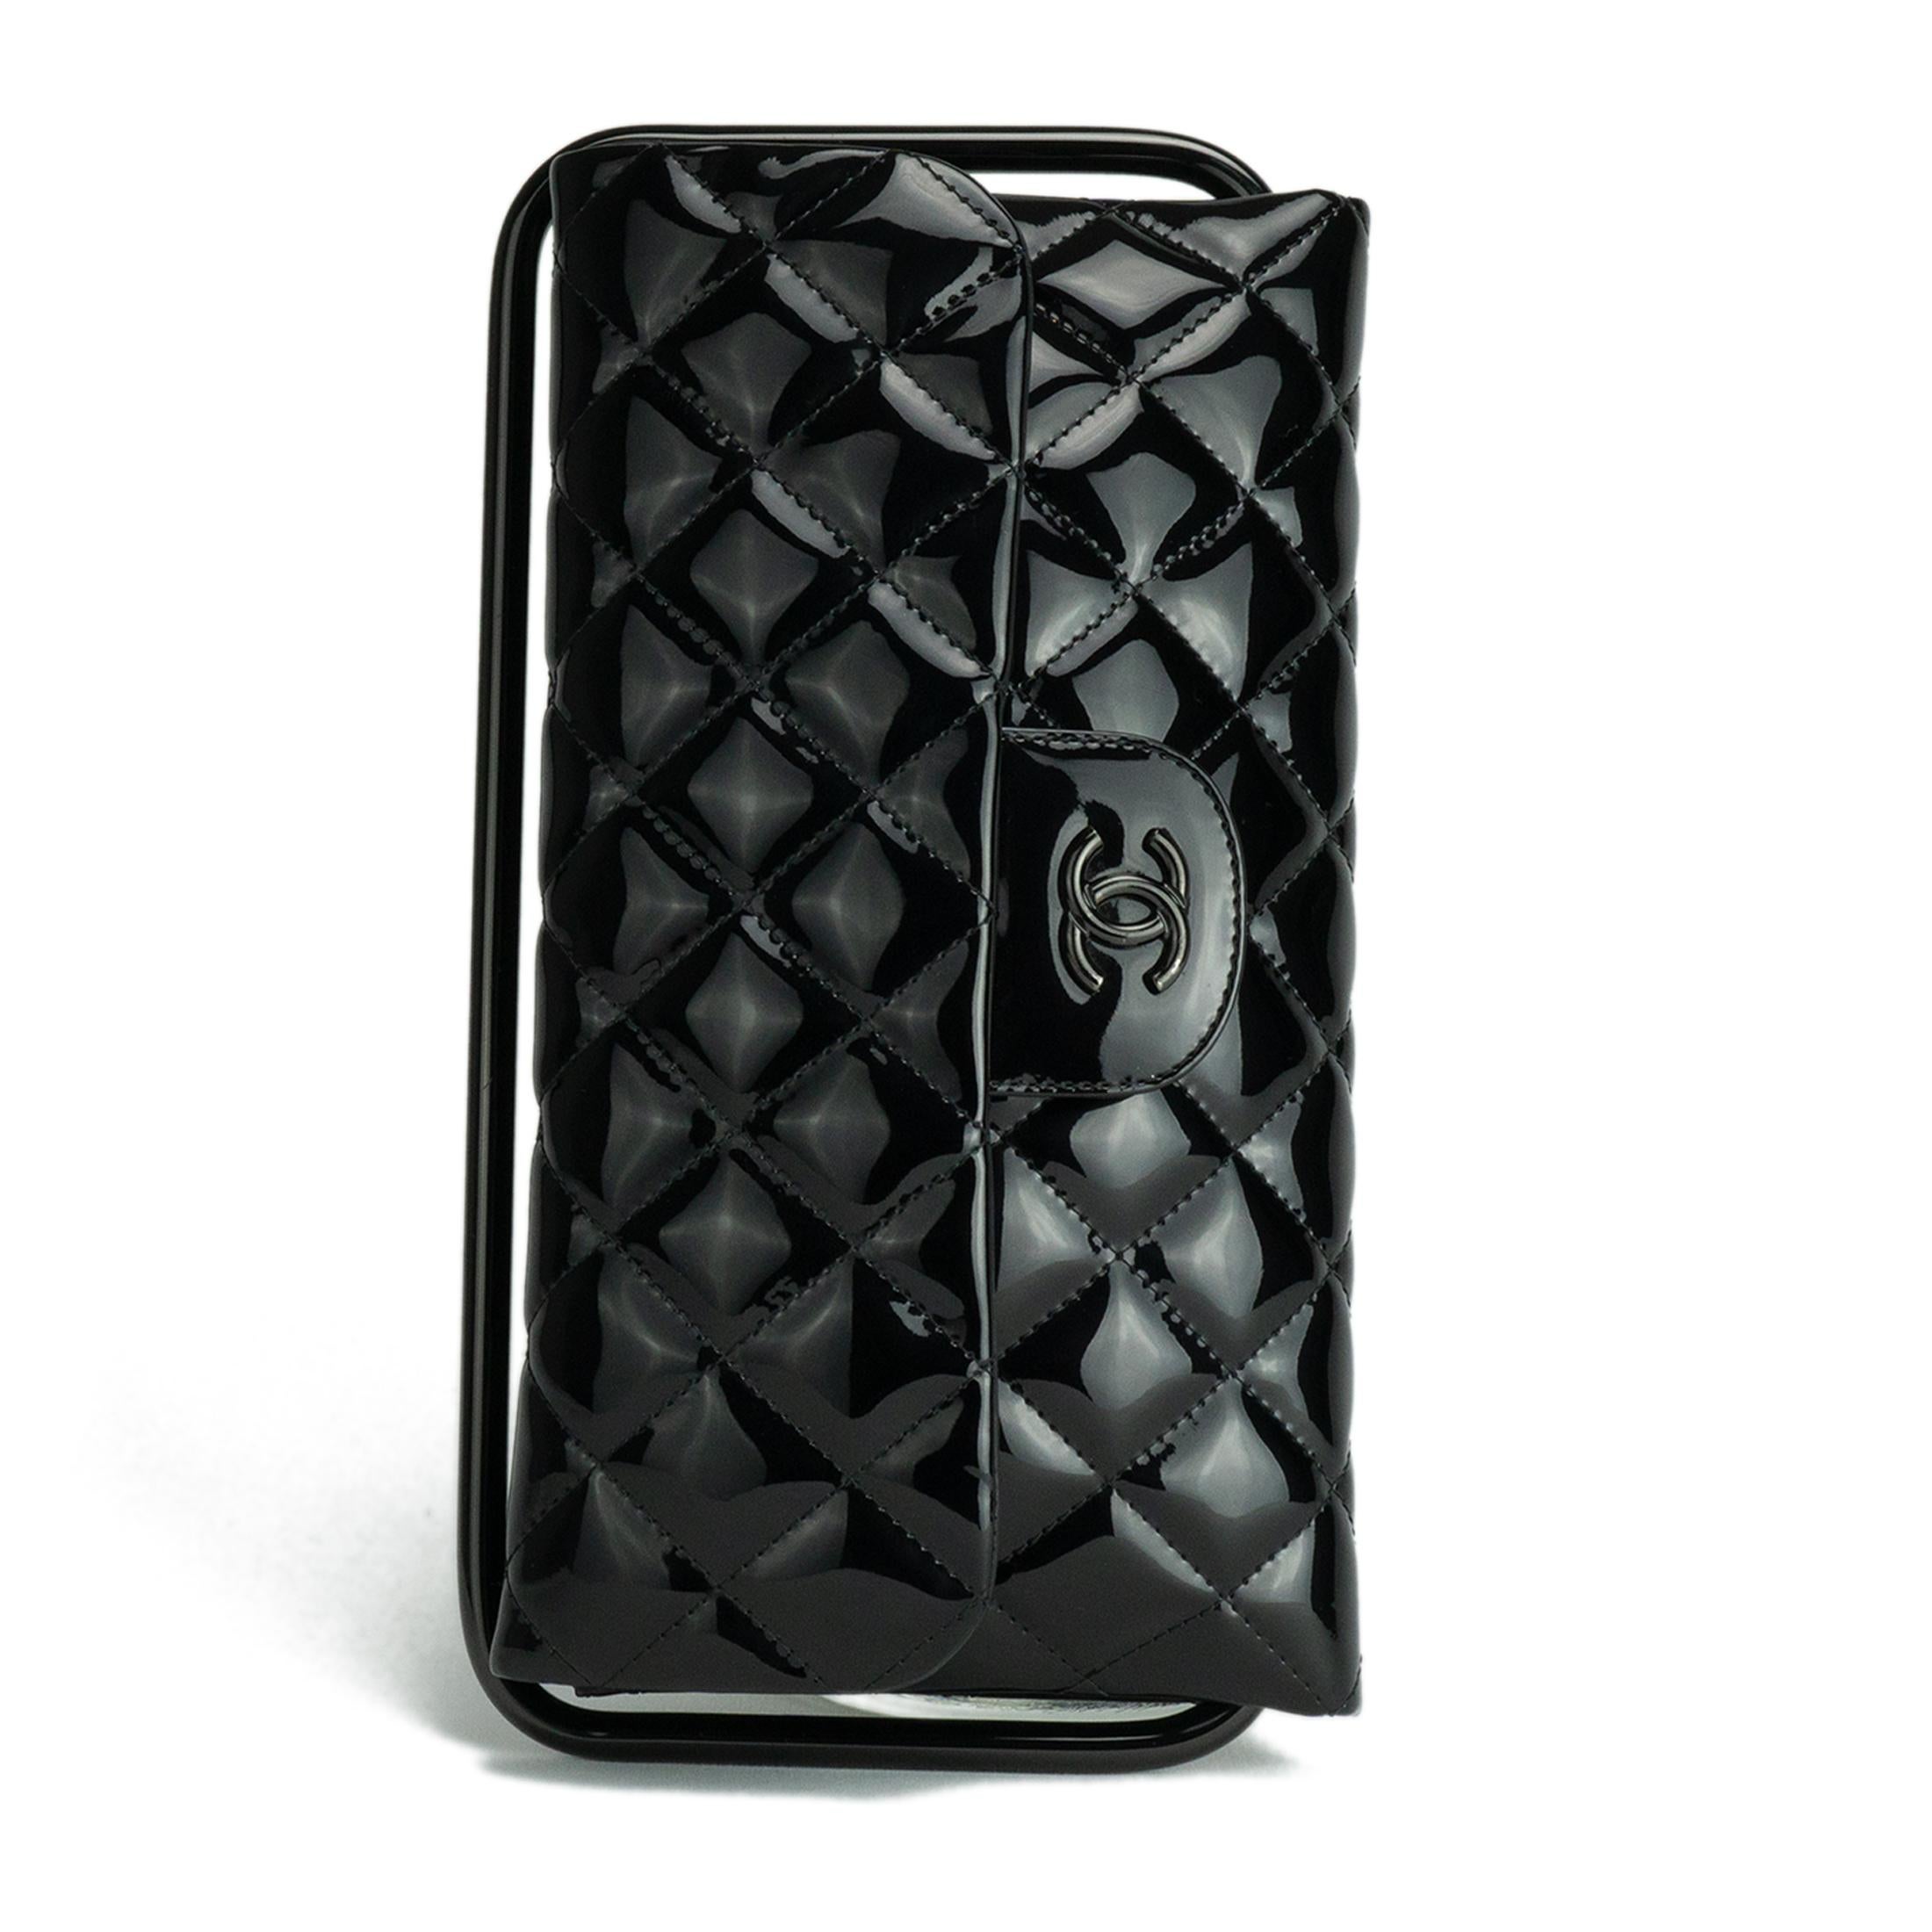 Chanel Classic Flap Patent Black Frame Clutch In Good Condition For Sale In Miami, FL